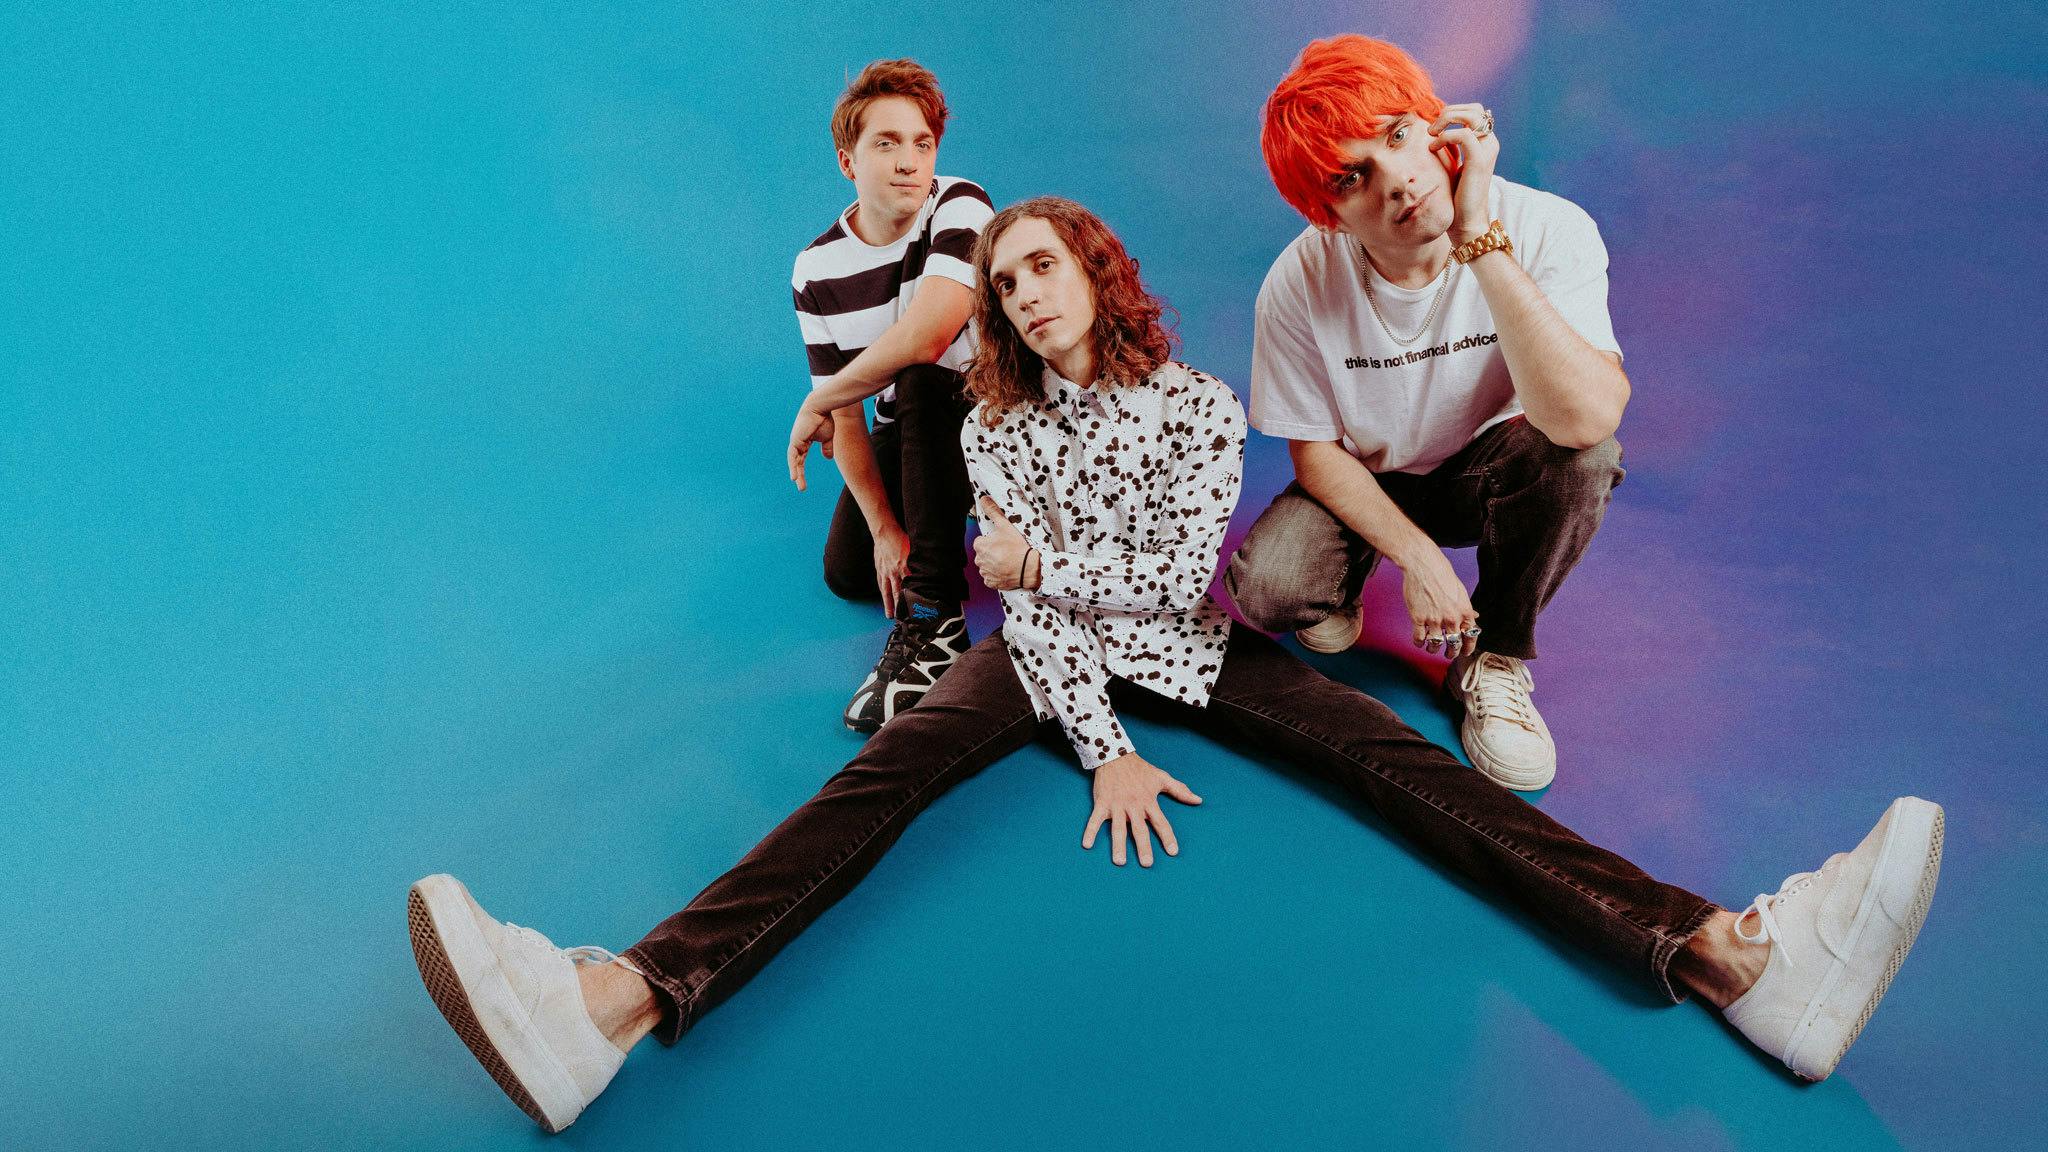 Waterparks drop new single REAL SUPER DARK and reveal album release date